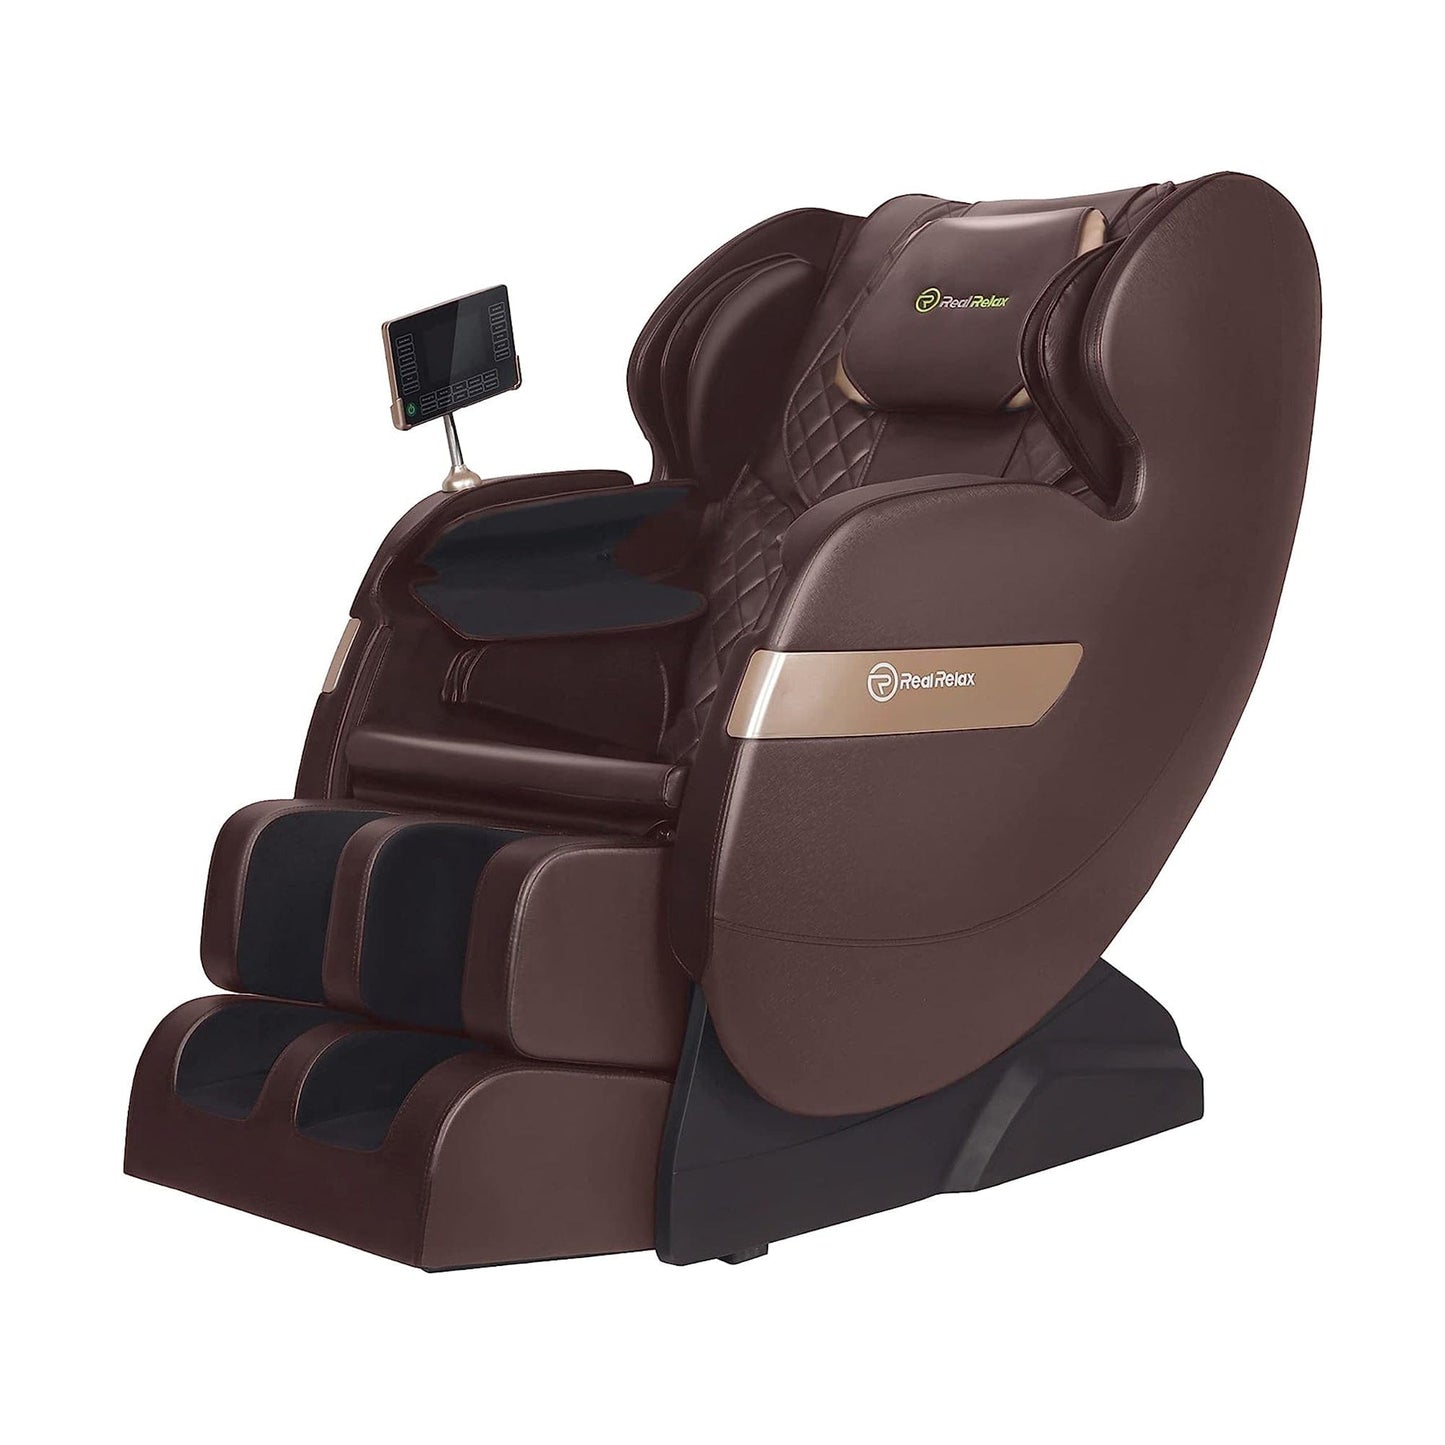 Real Relax Massage Chair Favor-03 ADV Massage Chair Brown